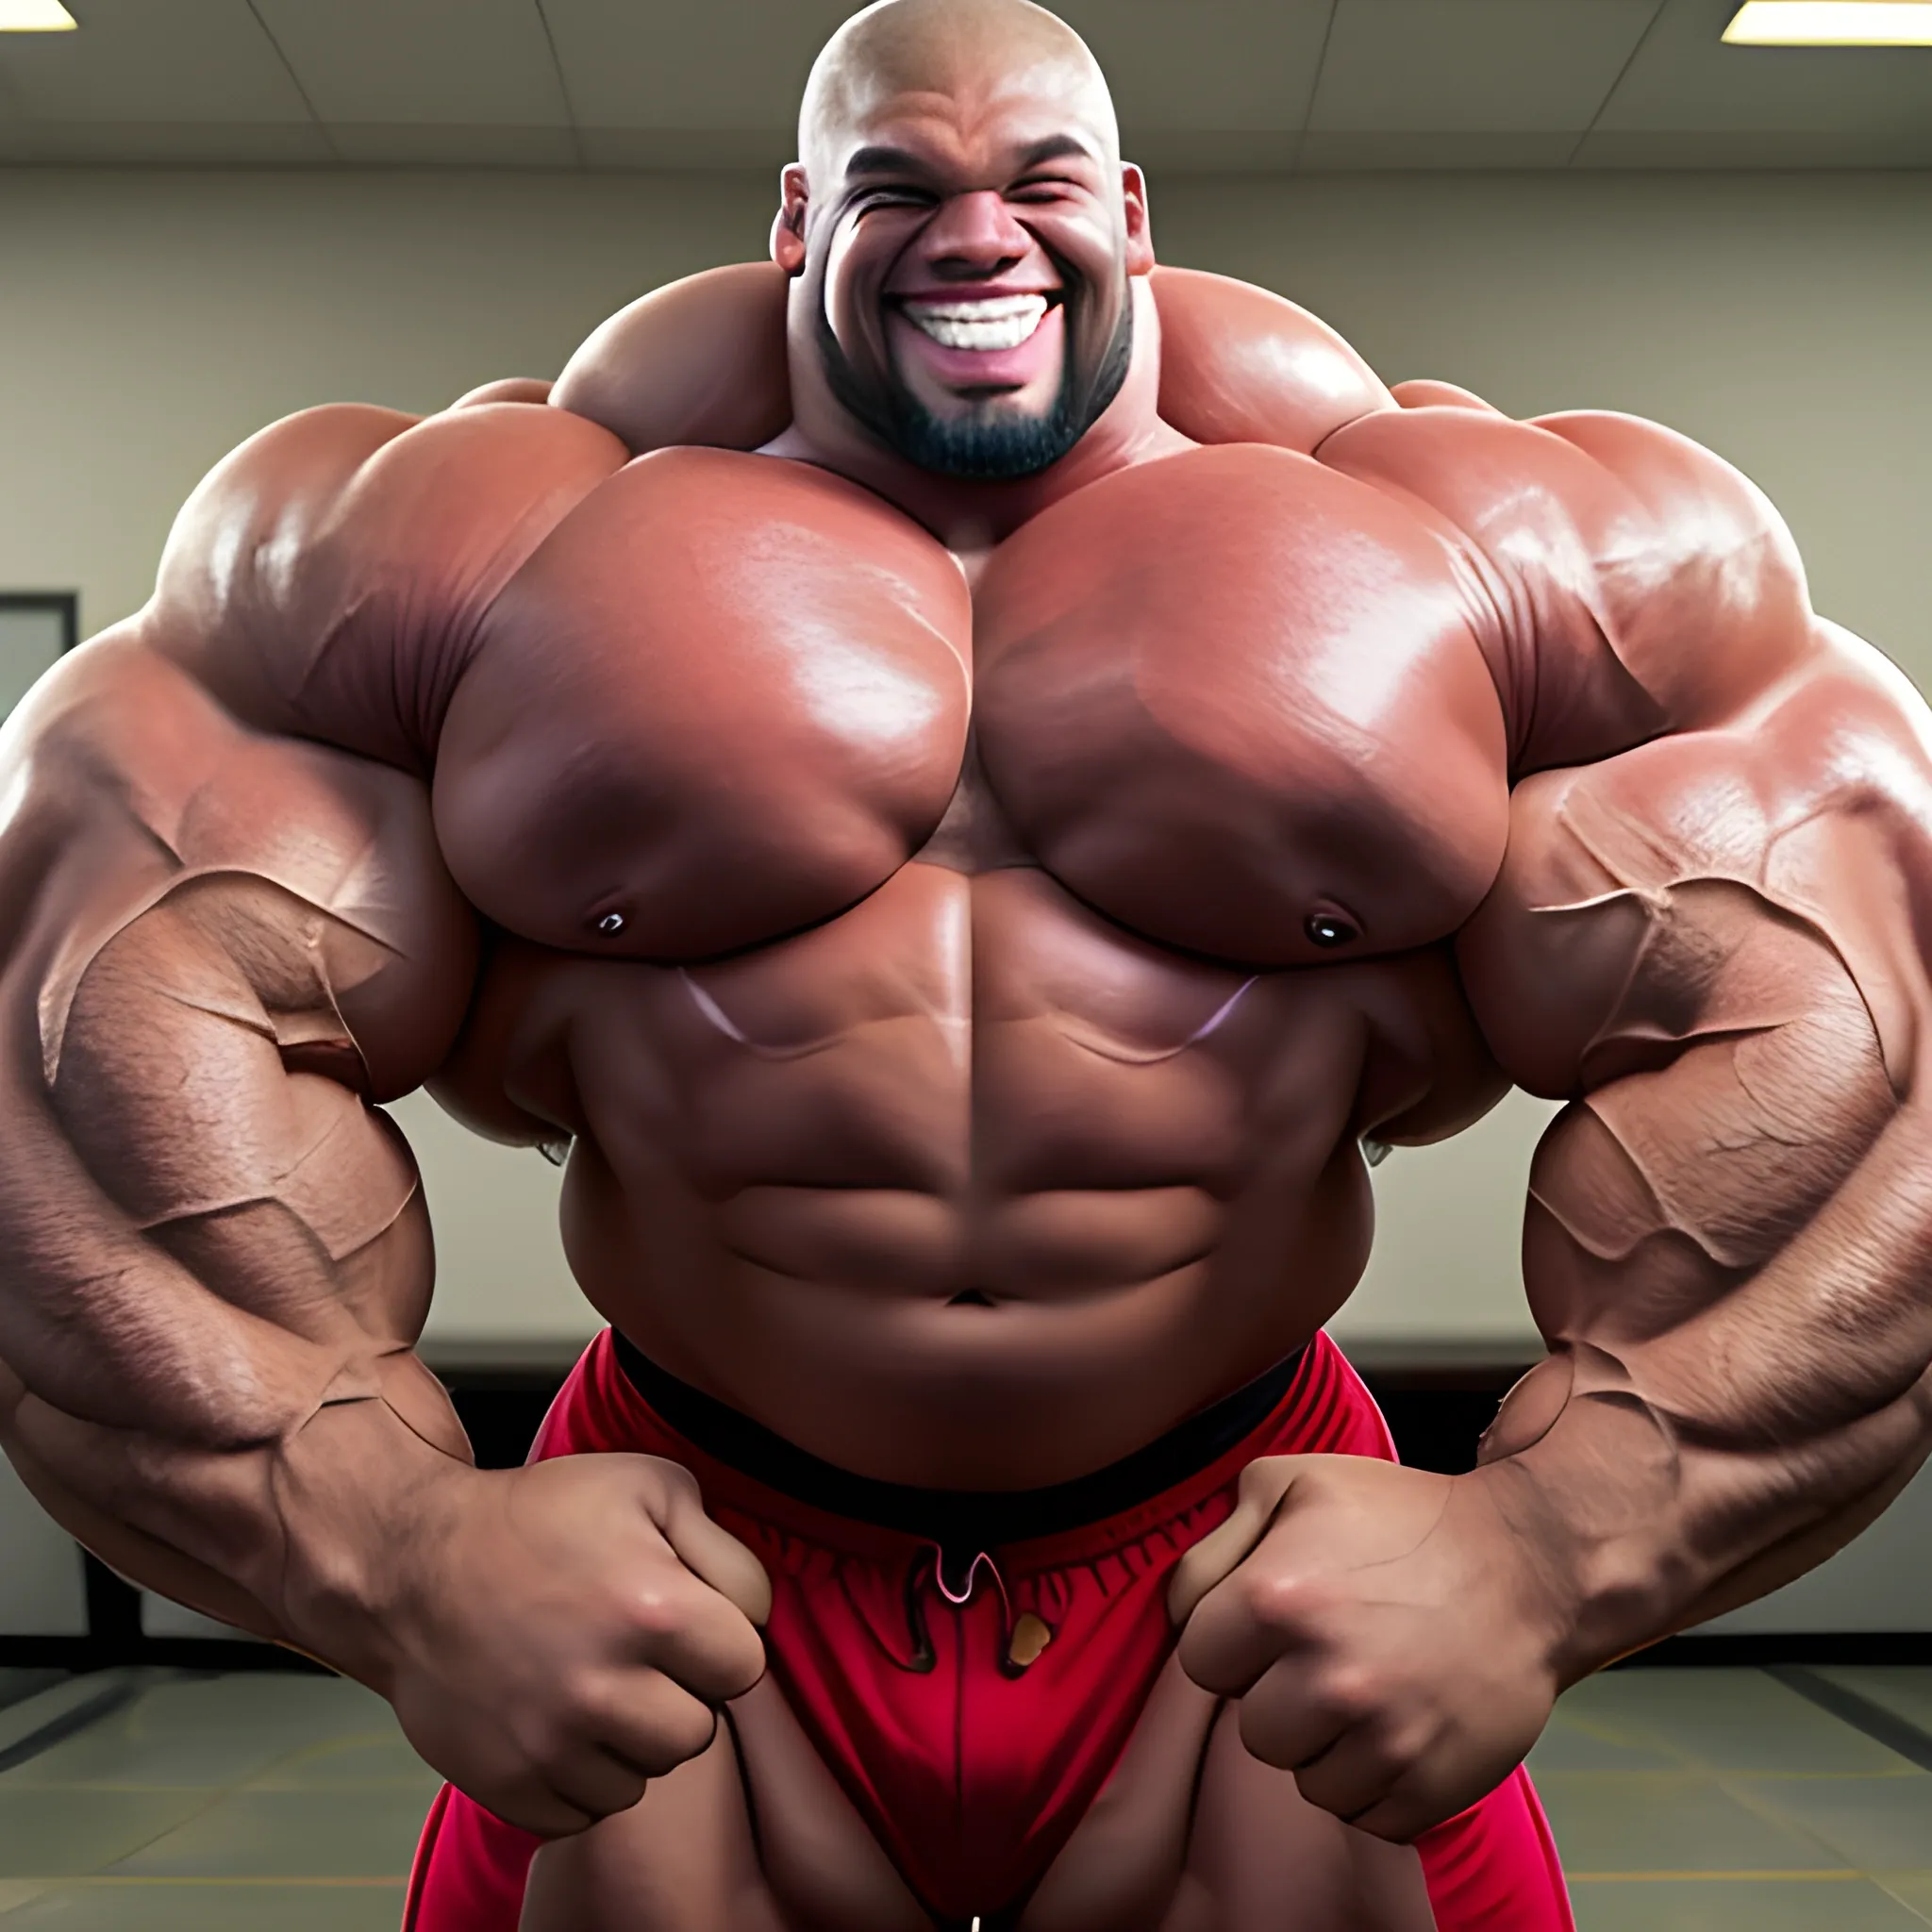 3-meters, beaatiful muscle morph, smile happy, long humongous arms, 3000 lbs bodybuilder, gigantic 300 inches biceps, huge biceps, extremely huge muscular arms, 300 inches enormous triceps, enormous forearms, gigantic traps, 300 inches chest, 
